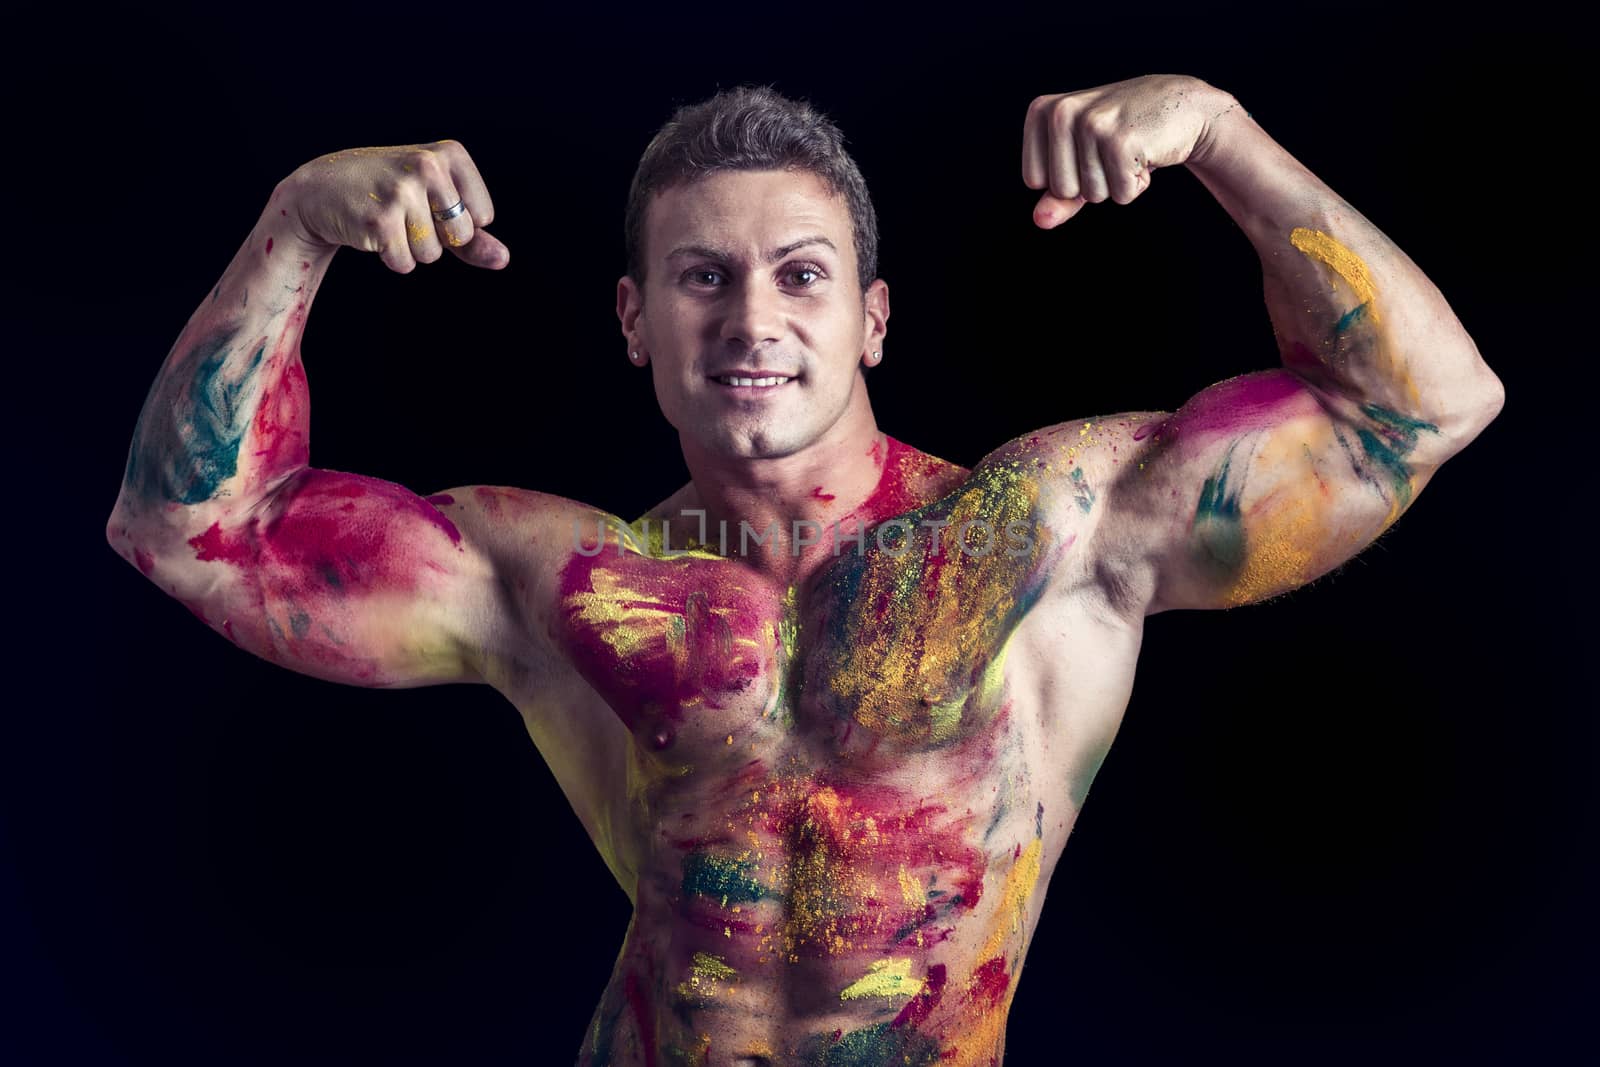 Muscular young man shirtless with skin painted with Holi colors, looking down, isolated on white